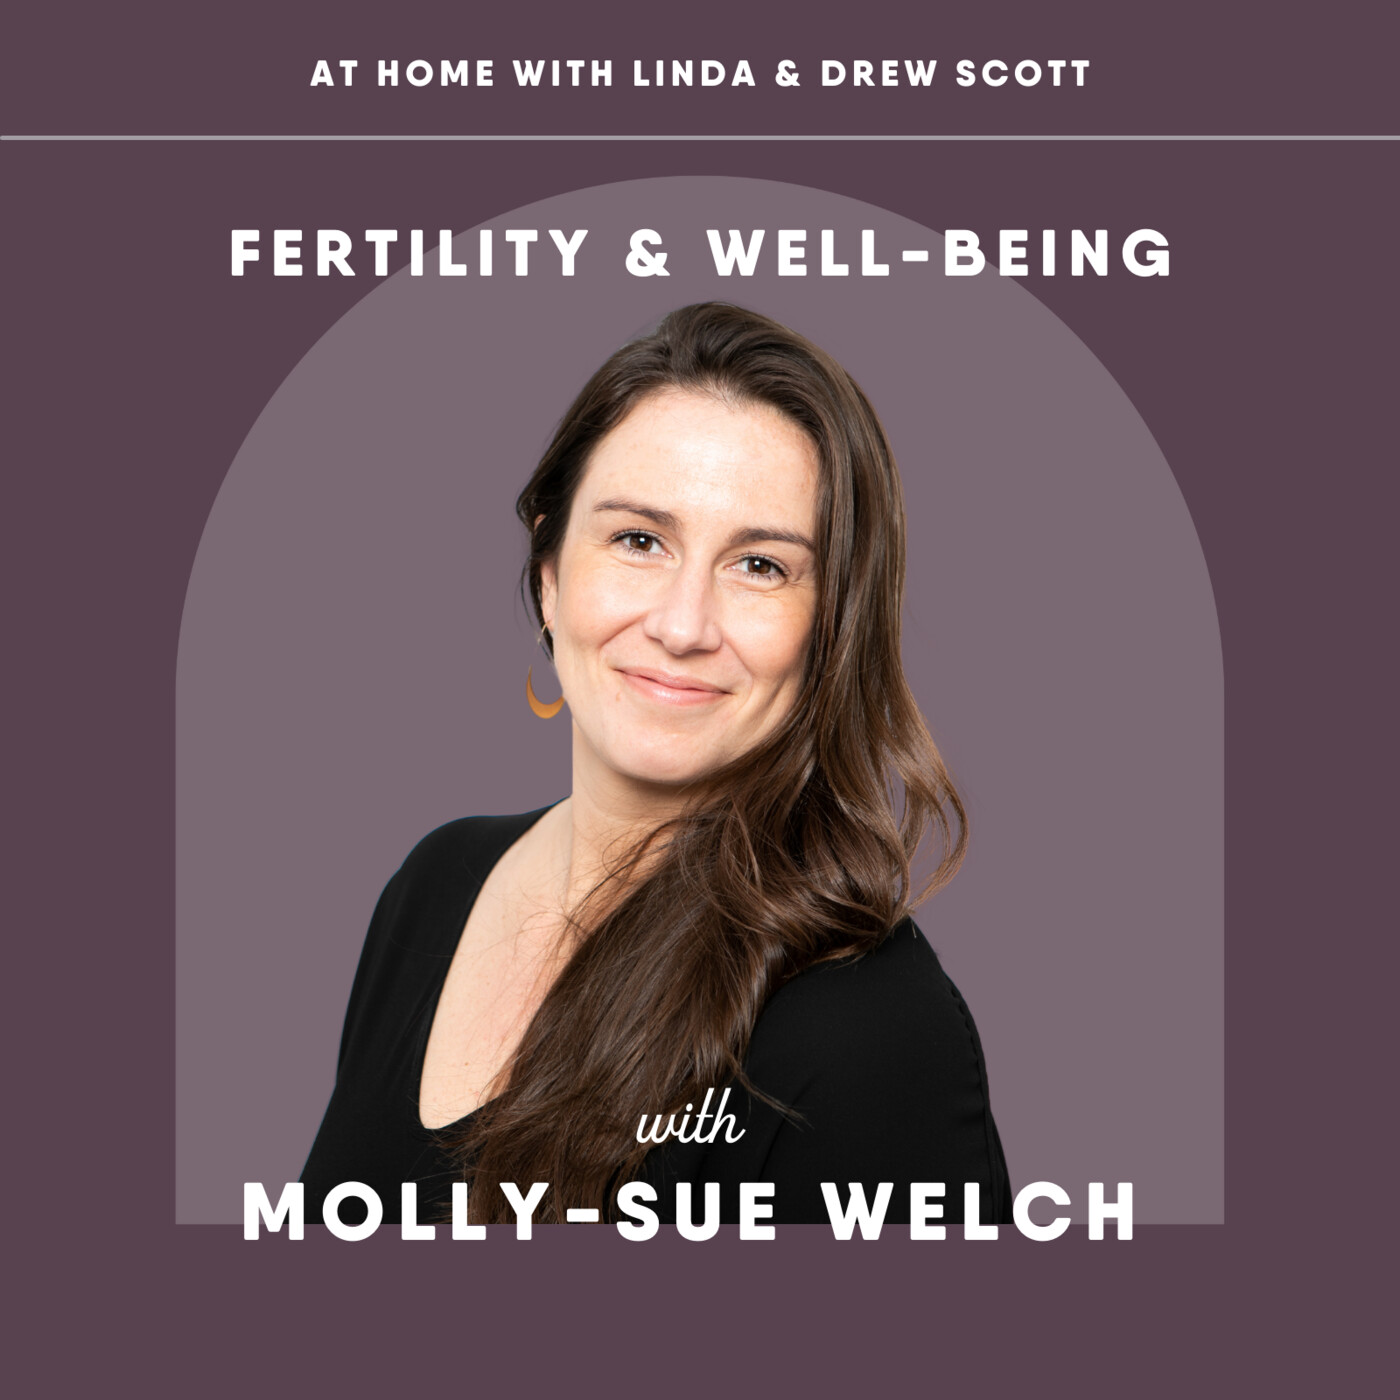 Meet our Doula & Acupuncturist, Molly Sue Welch